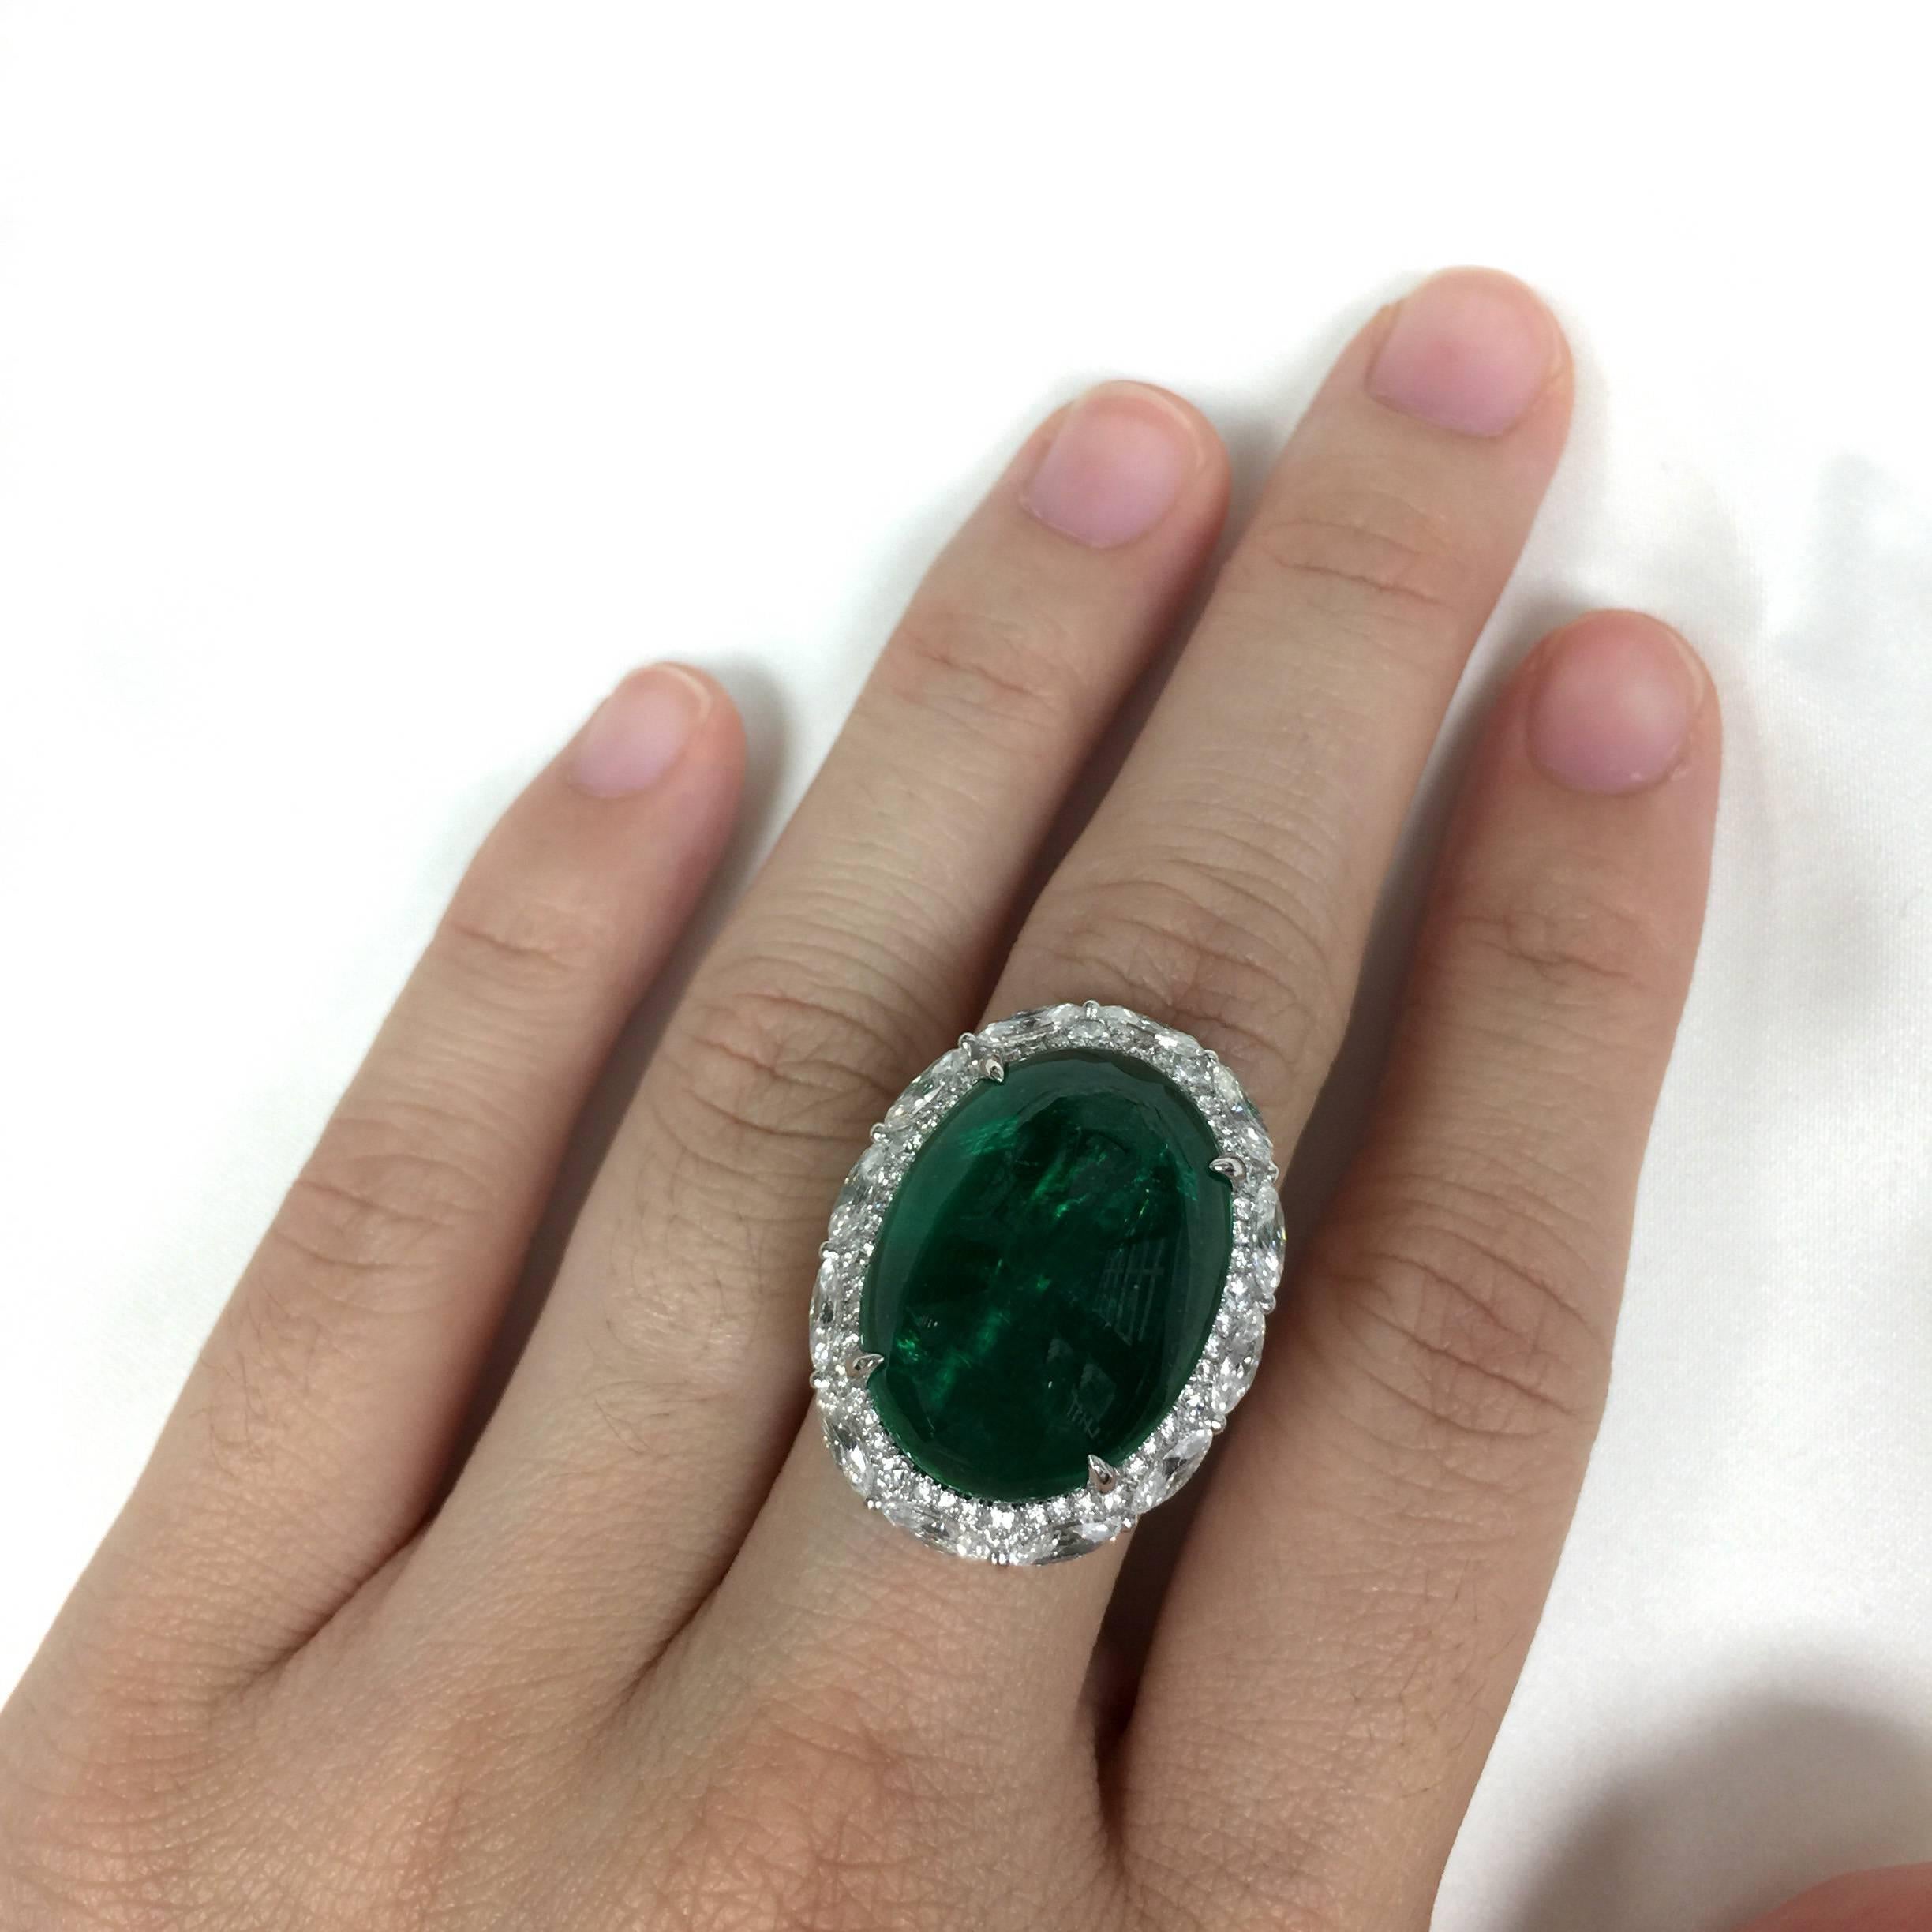 Women's or Men's 21.49 Carat Oval Cabochon Emerald Diamond Ring For Sale